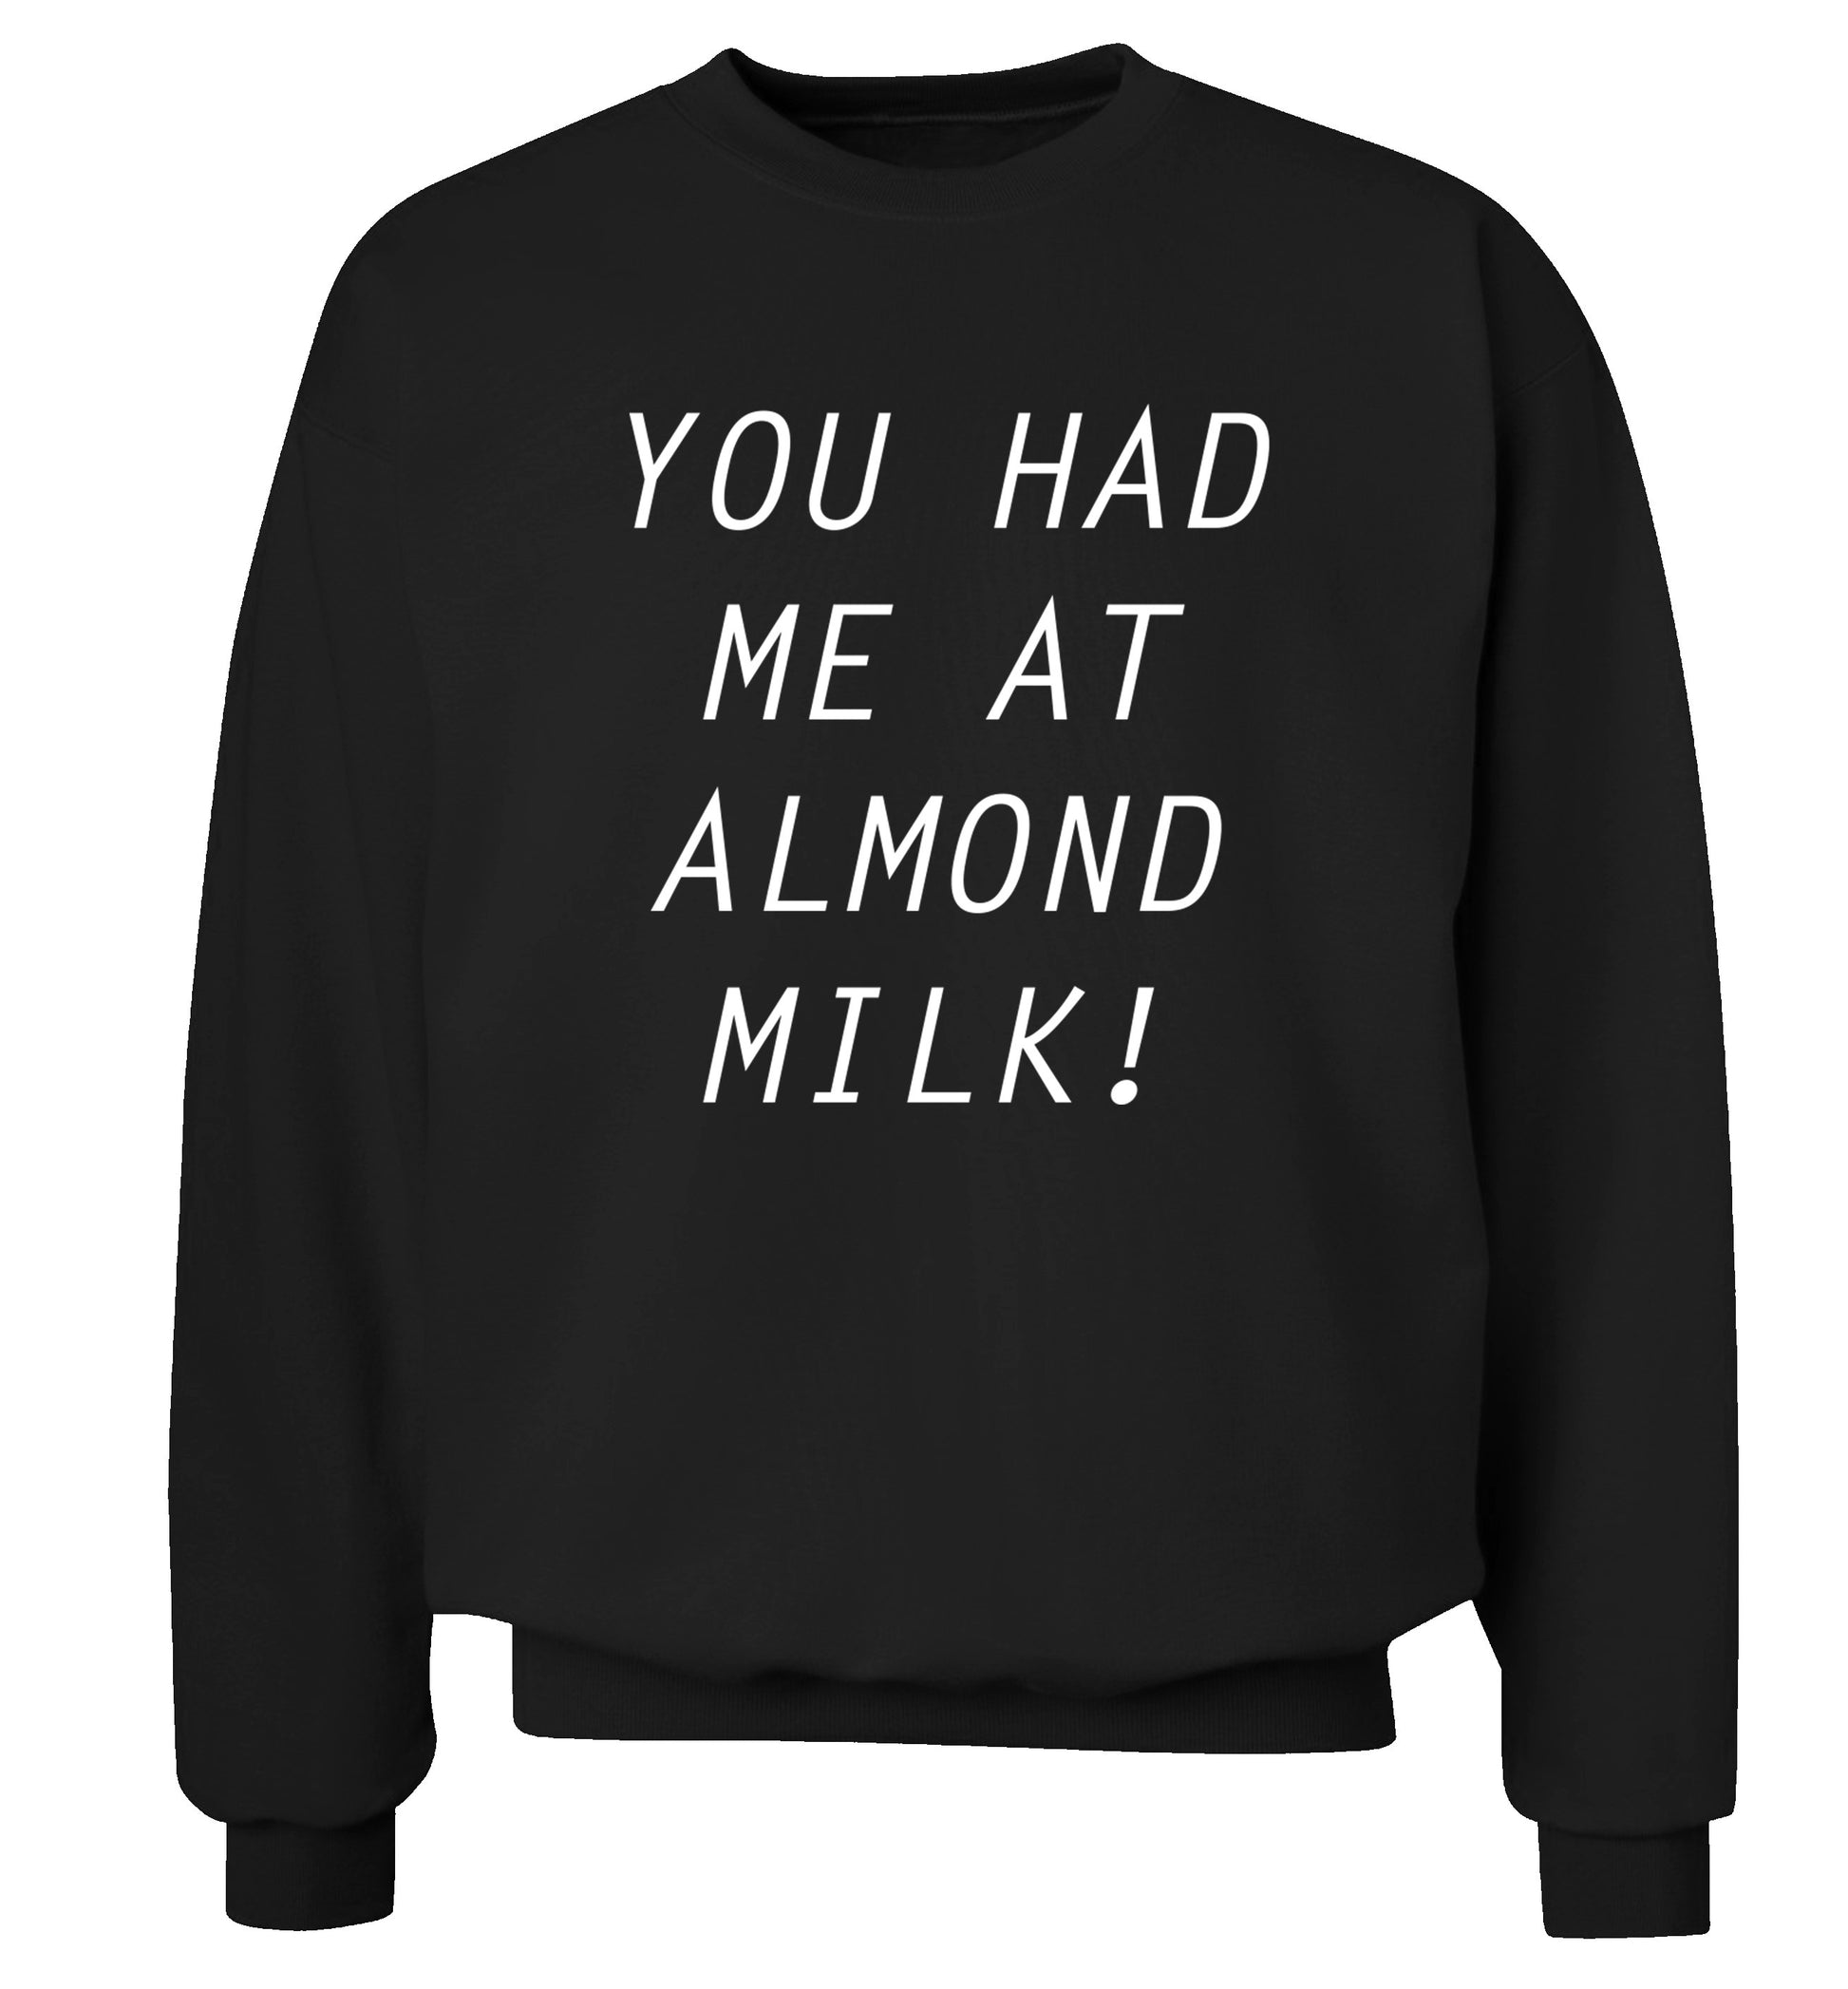 You had me at almond milk Adult's unisex black Sweater 2XL